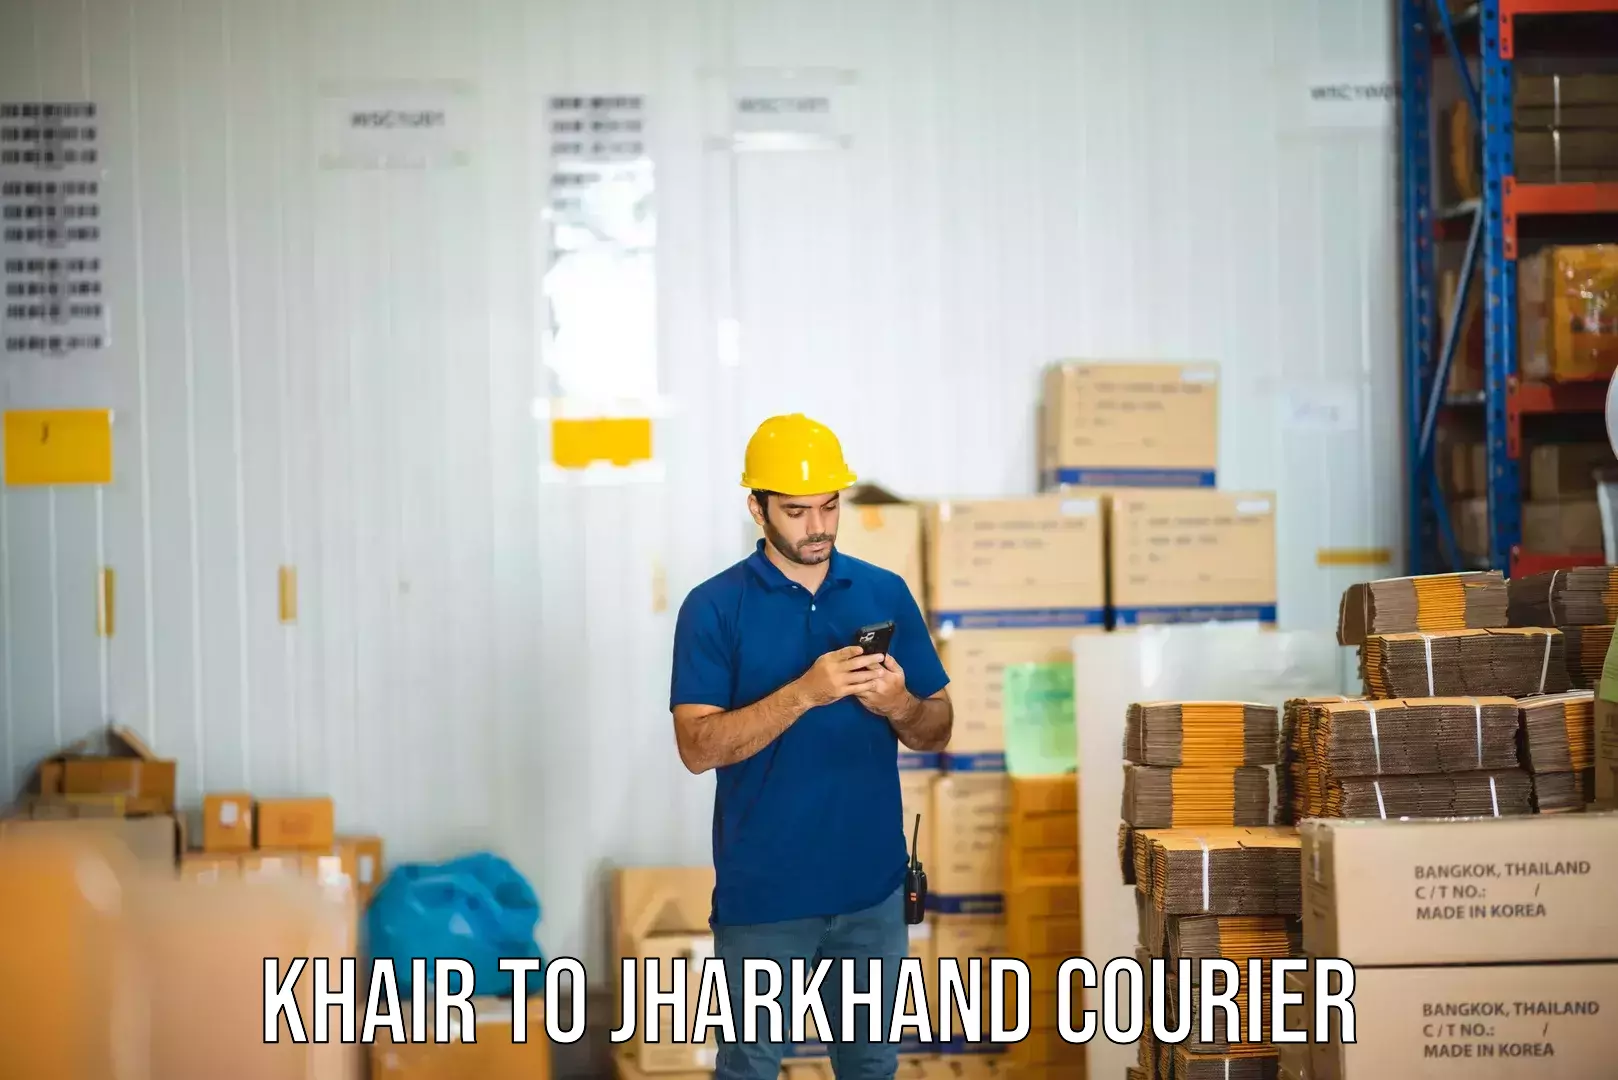 Courier service innovation Khair to Jharkhand